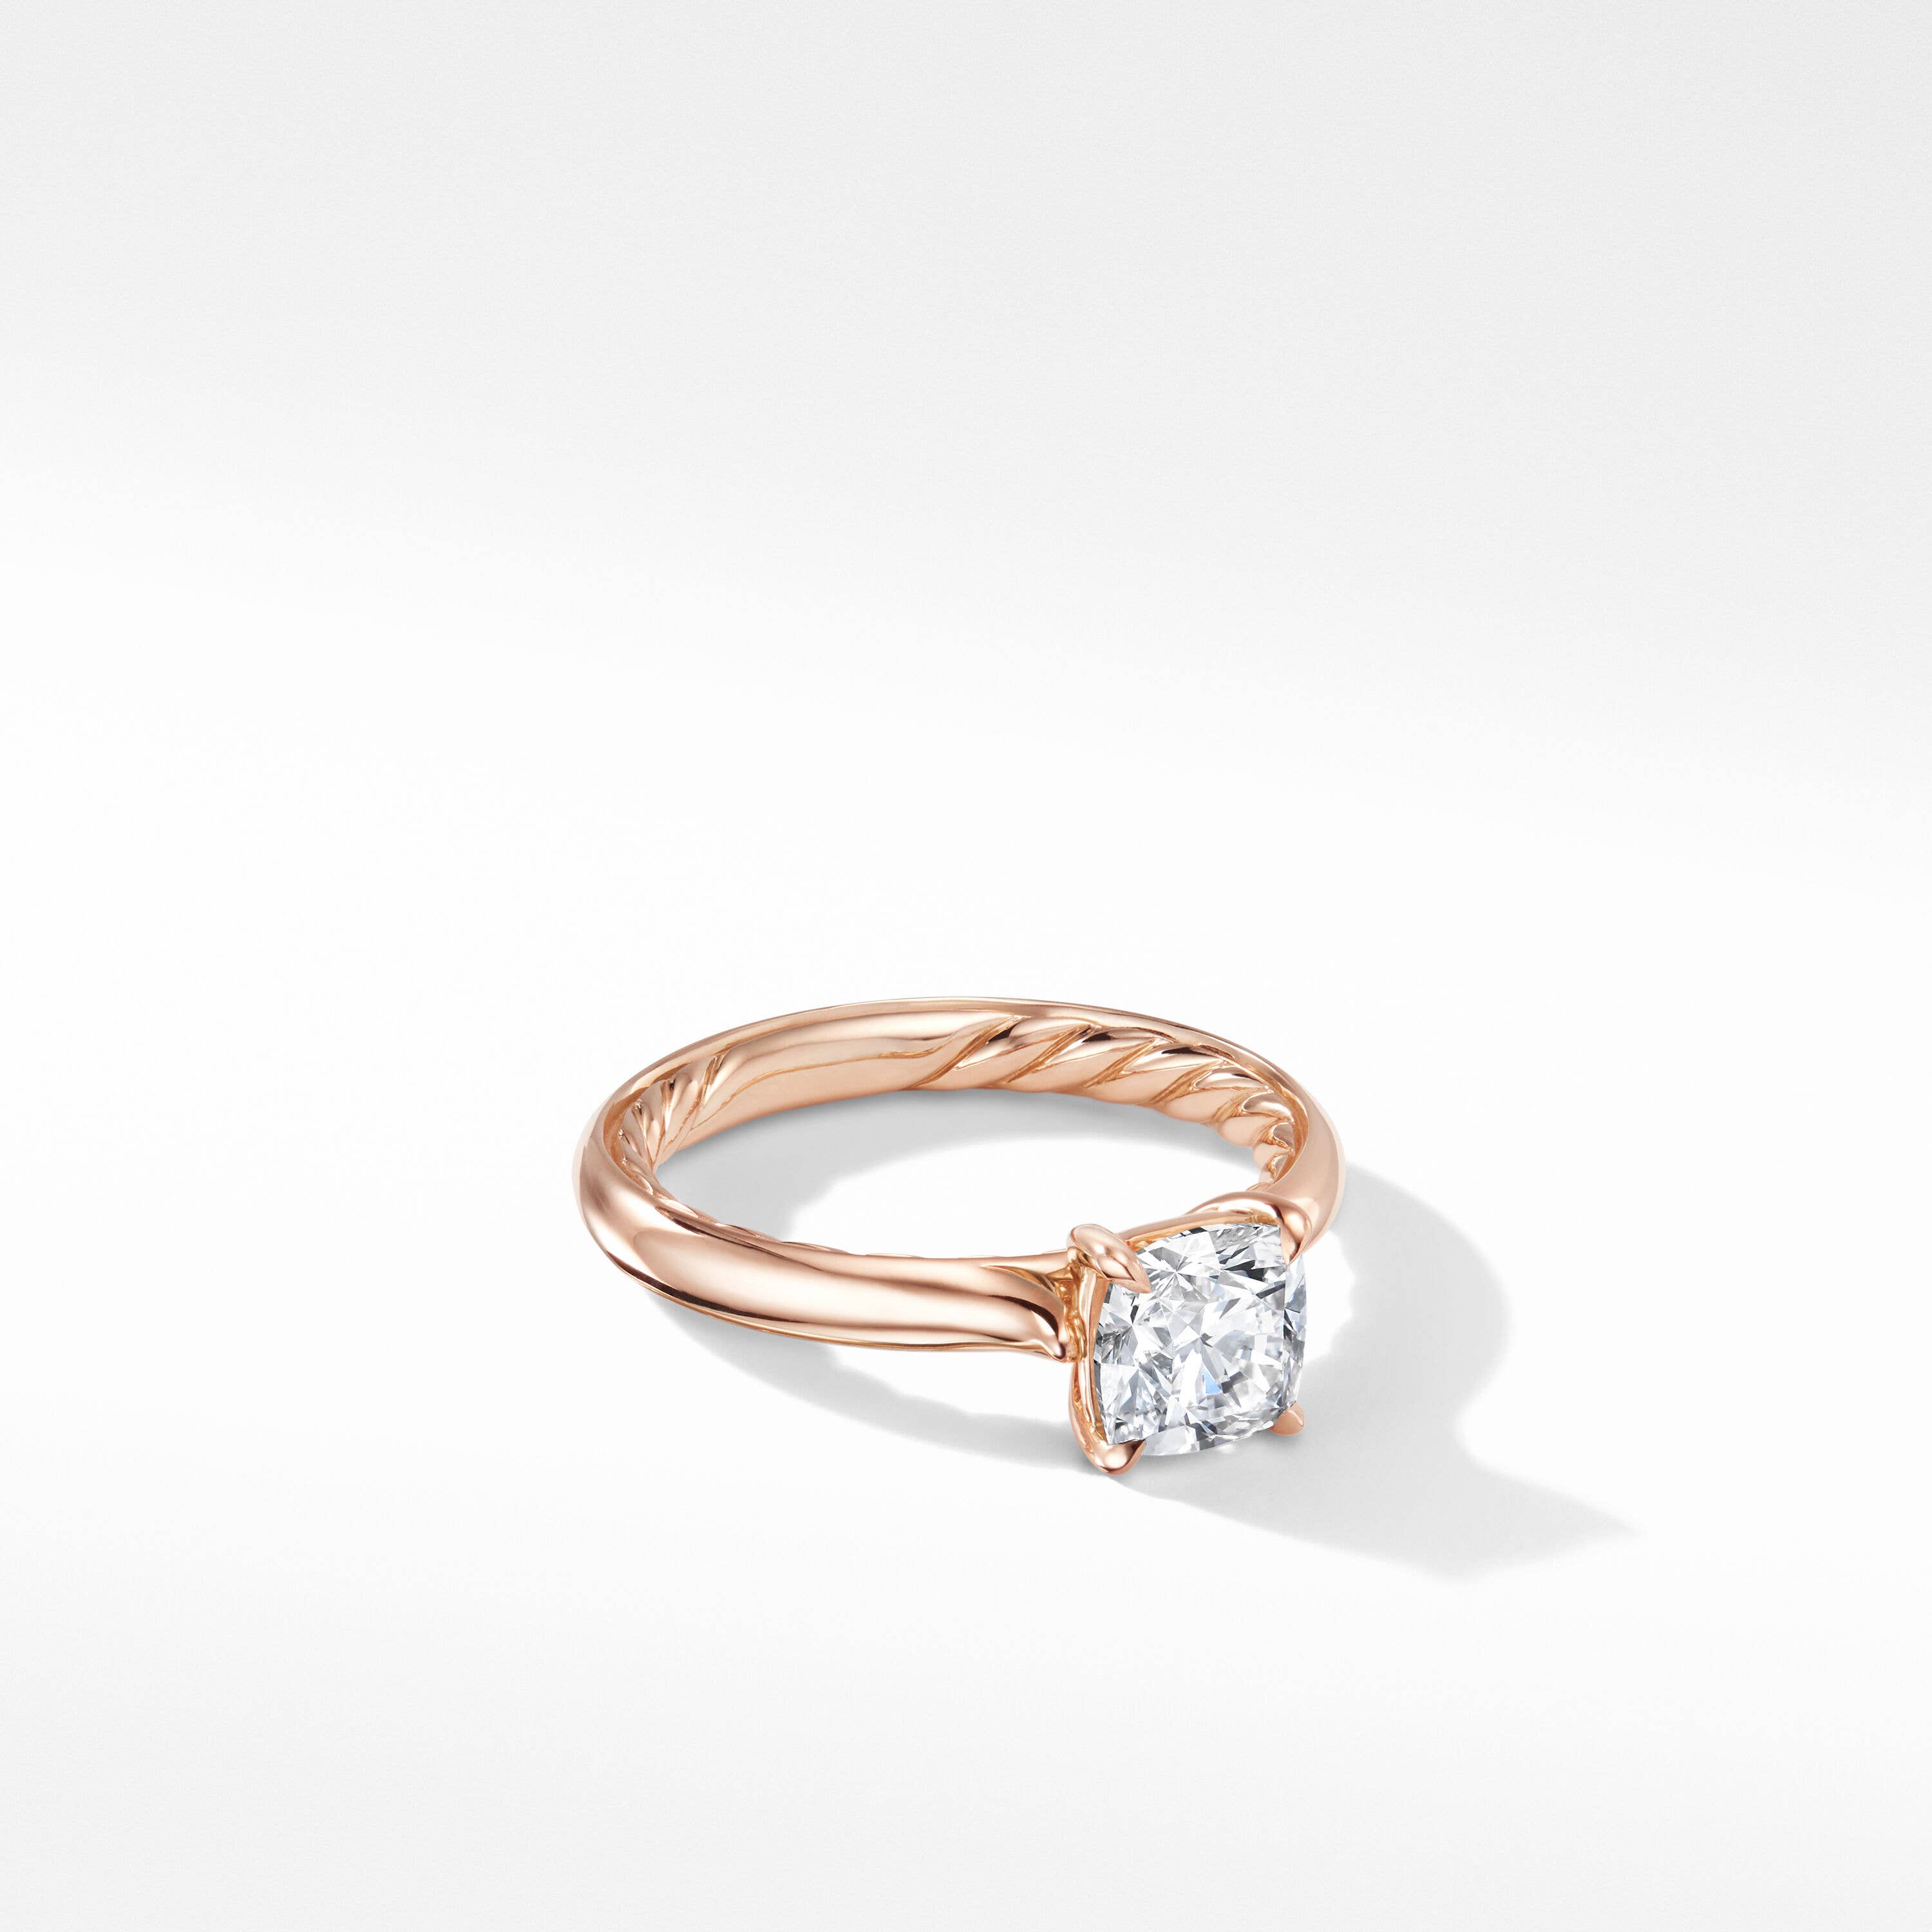 DY Eden Engagement Ring in 18K Rose Gold, Cushion